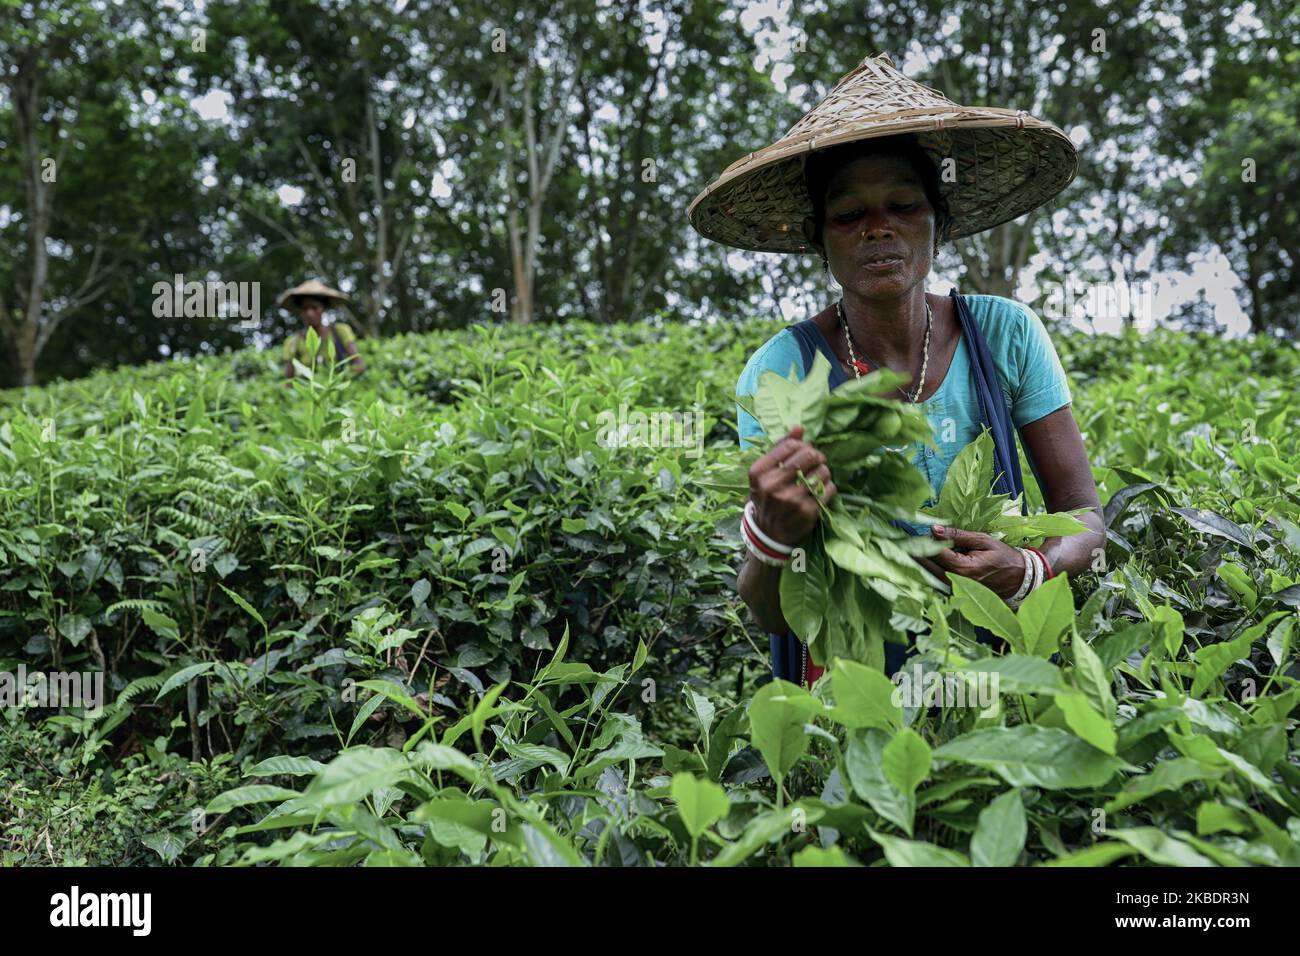 Woman plucking tea leaves from a tea garden at Sylhet Bangladesh on May 26, 2019. Tea Plucking is a specialized skill. Two leaves and a bud need to be plucked in order to get the best taste and profitability. The calculation of daily wage is 75tk(1$) for plucking at least 22-23 kg leaves per day for a worker. The area of Sylhet has over 150 gardens including three of the largest tea gardens in the world both in area and production. Nearly 300,000 workers are employed on the tea estates of which over 75% are women but they are passing their lives as a slave. (Photo by Kazi Salahuddin Razu/NurPh Stock Photo